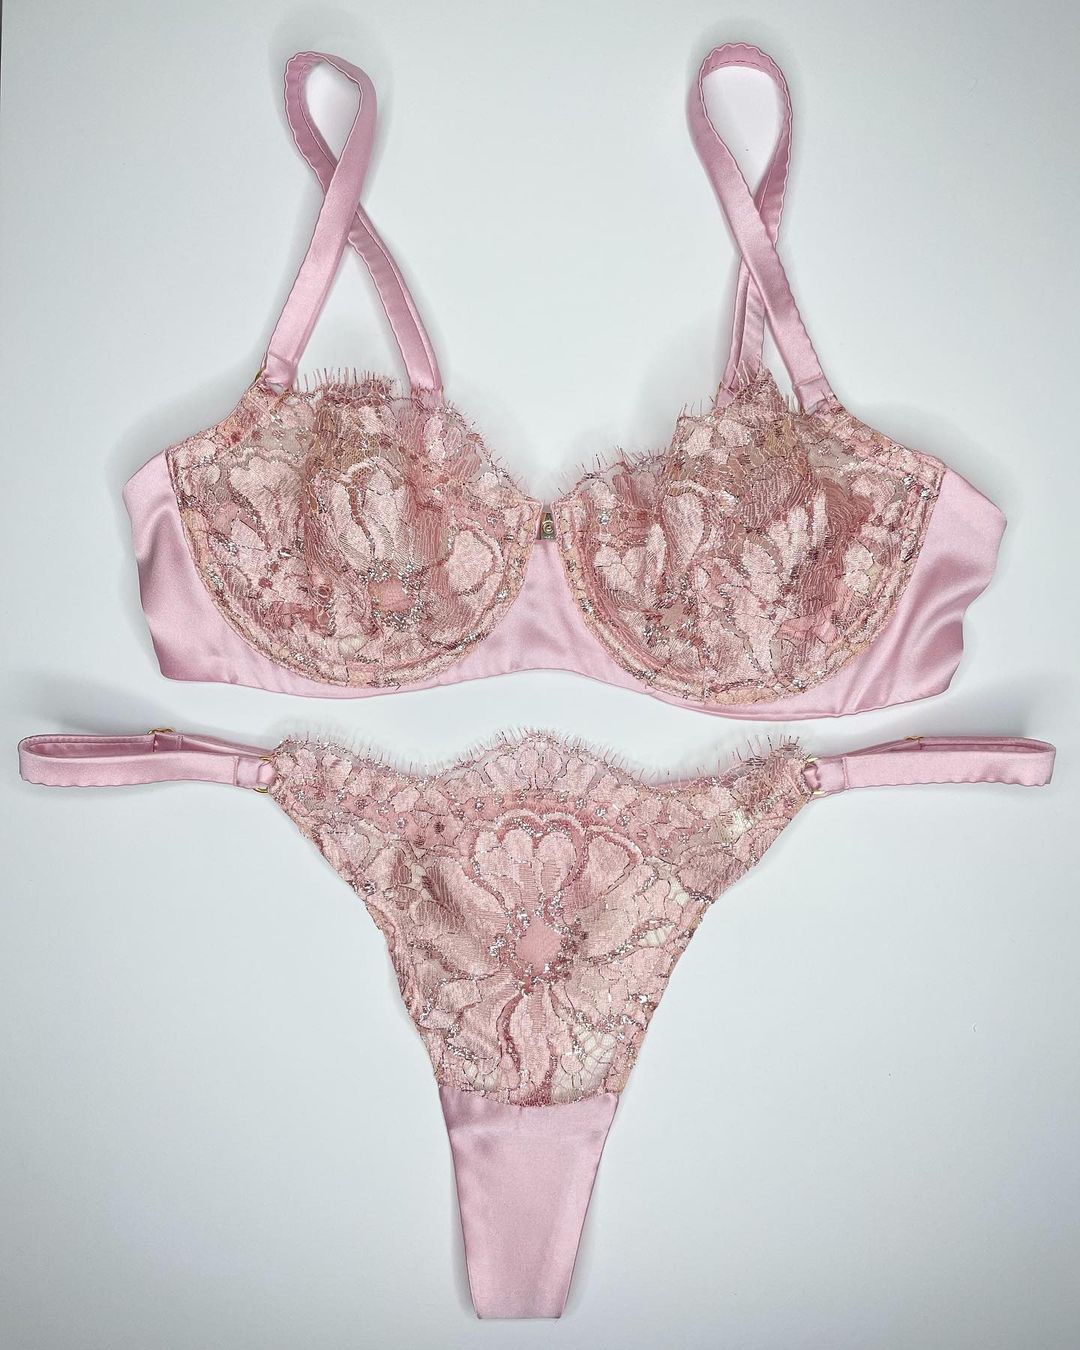 Freolic Luxury /silk and Lace bra and panty set as featured on Lingerie Briefs